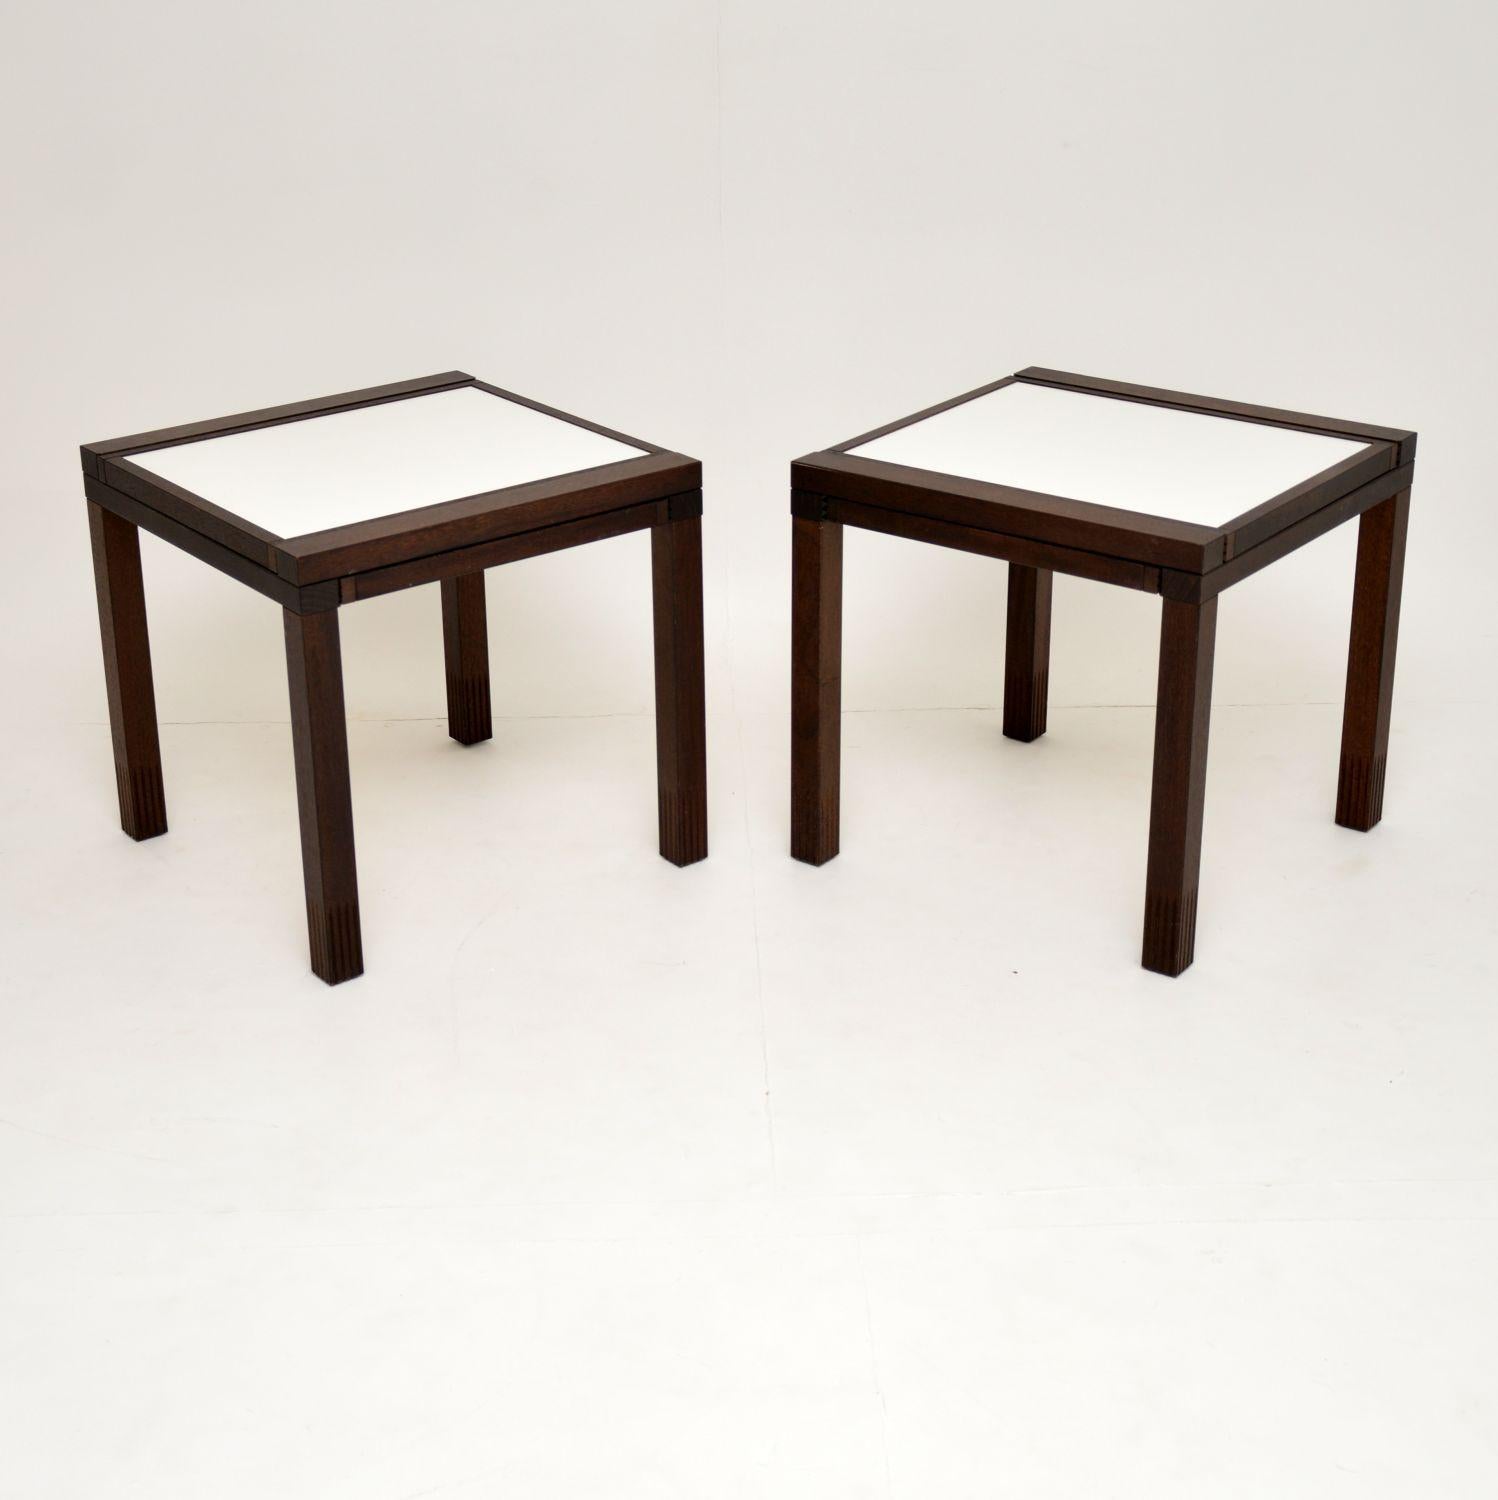 A stunning and very rare pair of vintage ‘Hexa’ side tables, these were designed by Bernard Vuarnesson. They were made in Italy during the 1980s by Bellato. These are made from solid wood, each has two separate white Formica tops that slide out at